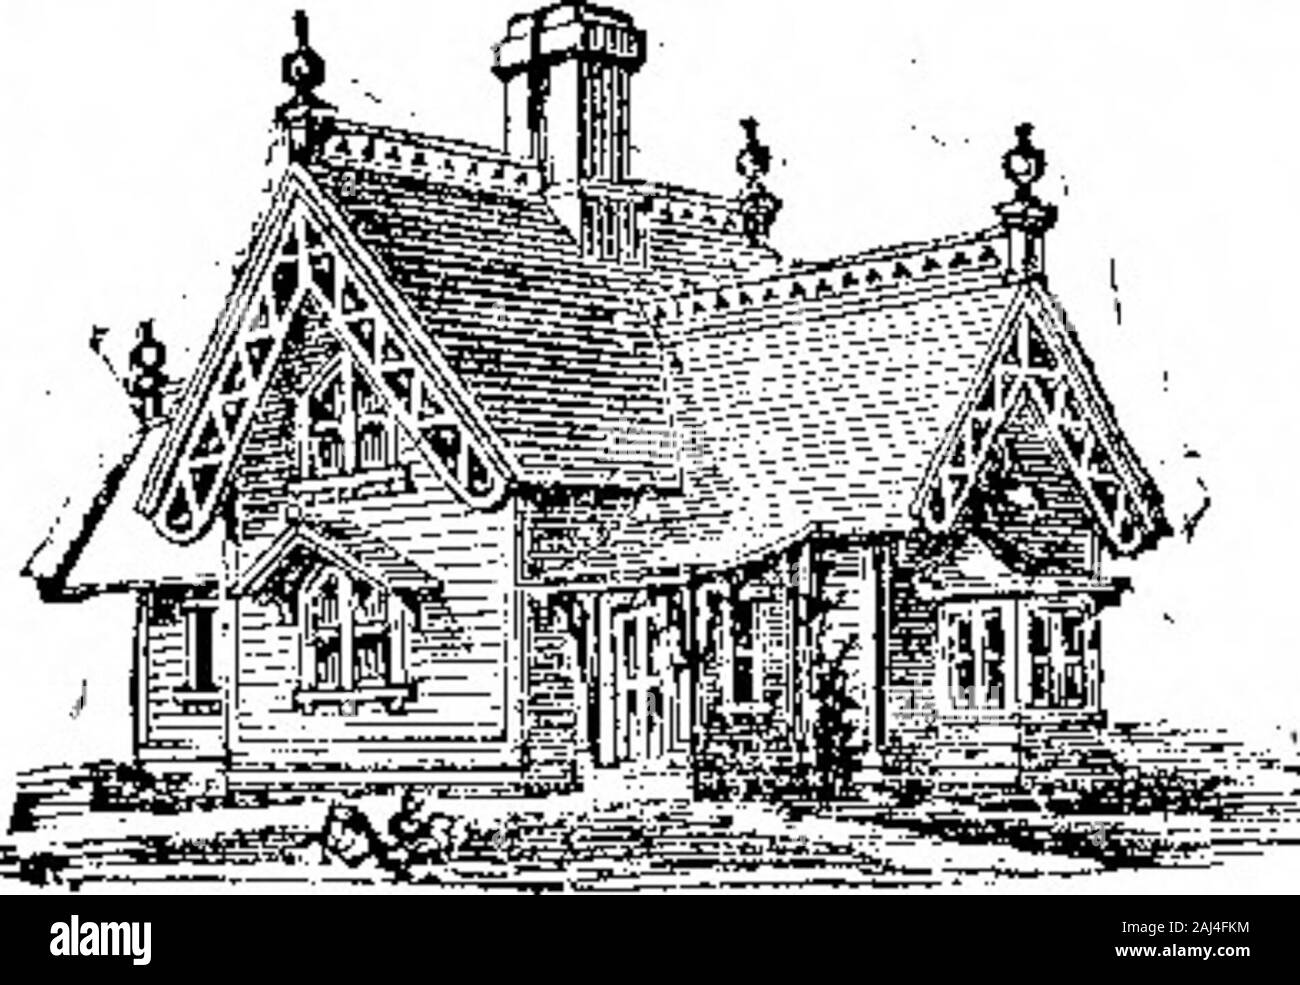 Scientific American Volume 20 Number 24 (June 1869) . WOODWARDS NATIONAL ARCHITECT. A practical workjustpublished, containing1000 Designs,Plans,andDetails to WorkingScale of Country, Su-burban, an* VillageHouses,with Specifica-tions an* estimate ofcost. Quarto. PRICE Twelve Dollars, postpaid. ?tTT//xiTxr a -n-nci f 150 Designs, $1 50, postpaid.WOODWARD S GEO.E.WOODWARD,Architect191 Broadway,New York.Send stamp for catalogue of allnew hooks on Architecture.23 os2. COUNTRYHOMES. WIRE ROPE. Manufactured by JOHN A. ROEBLING Trenton N. J.[?OR Inclined Planes, Standing ShiJP Bridges.Ferries,Stays Stock Photo